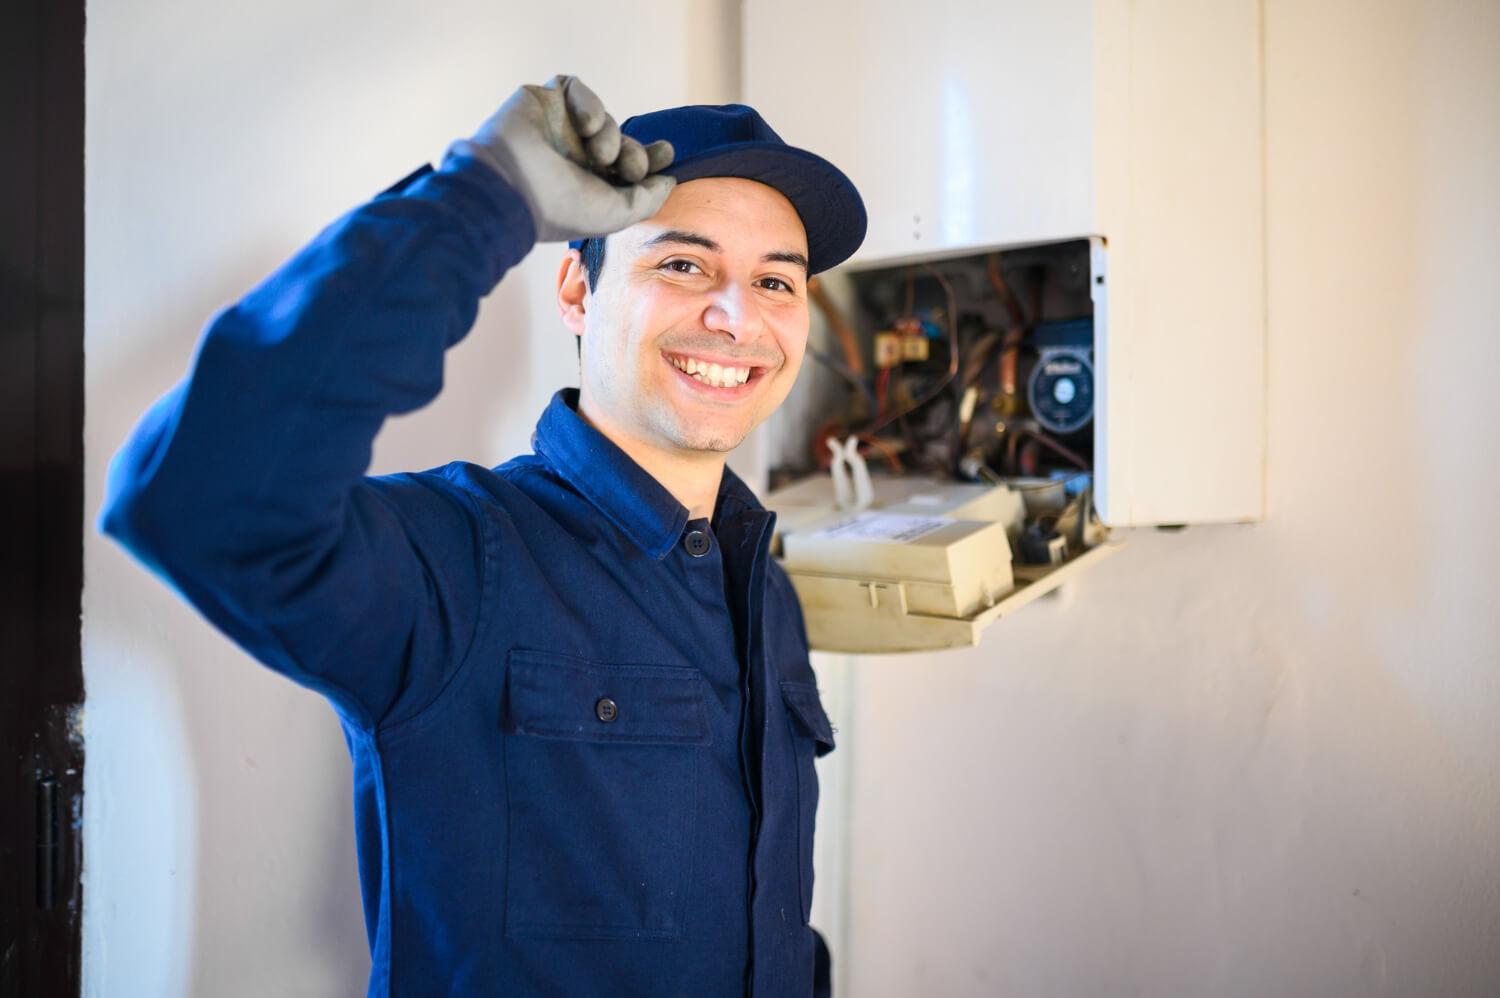 plumber smilling on camera with fixed boiler behind him